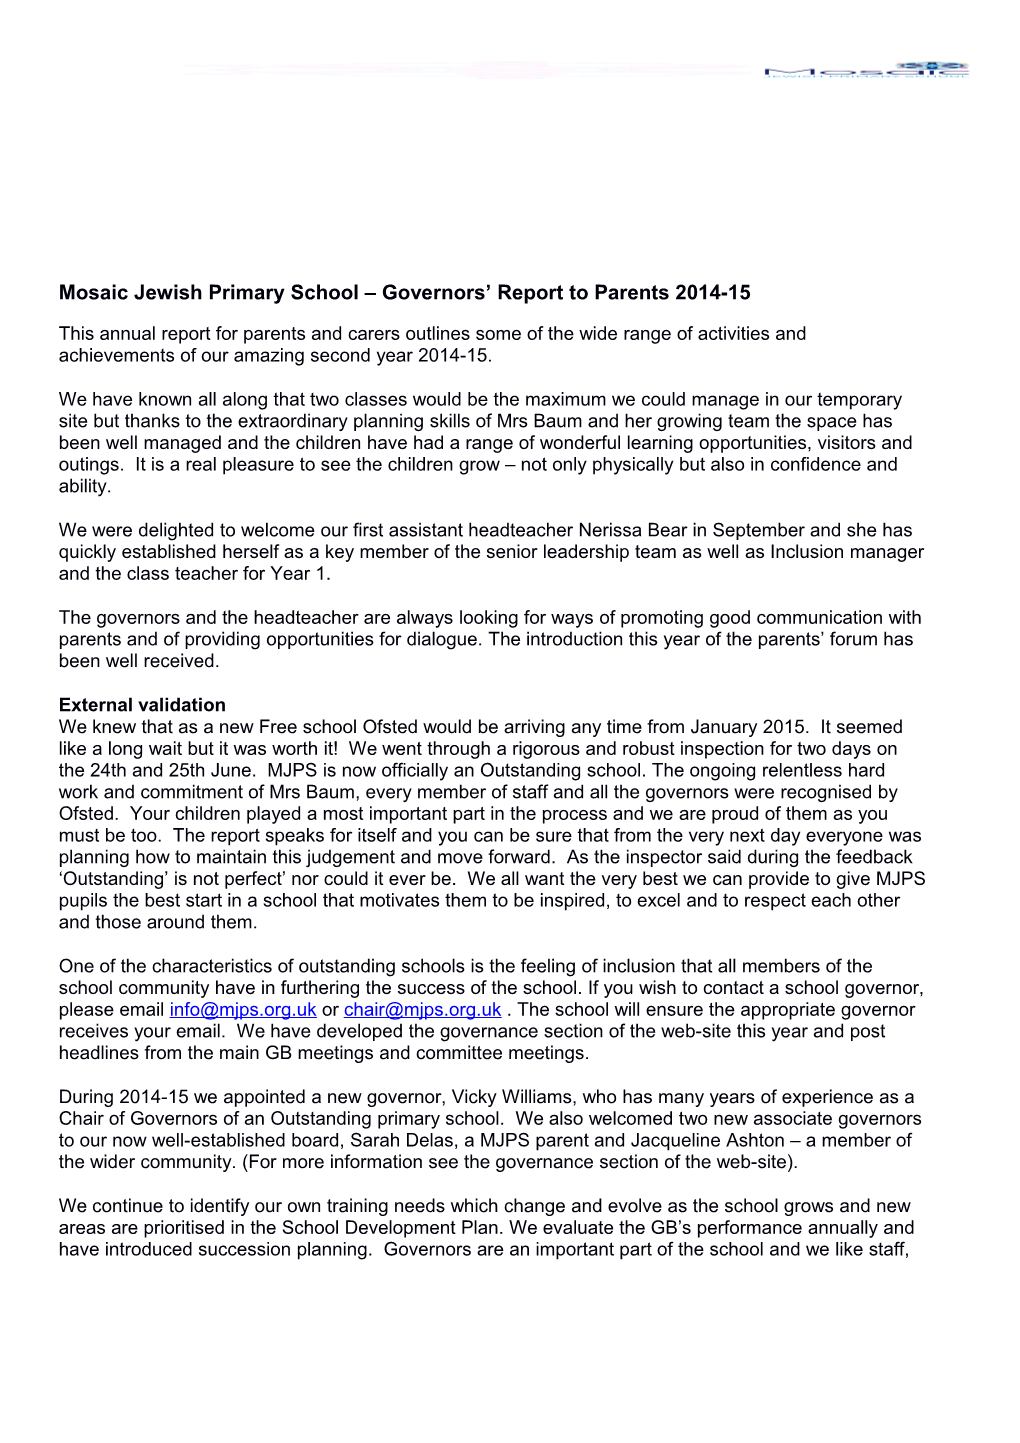 Mosaic Jewish Primary School Governors Report to Parents 2014-15